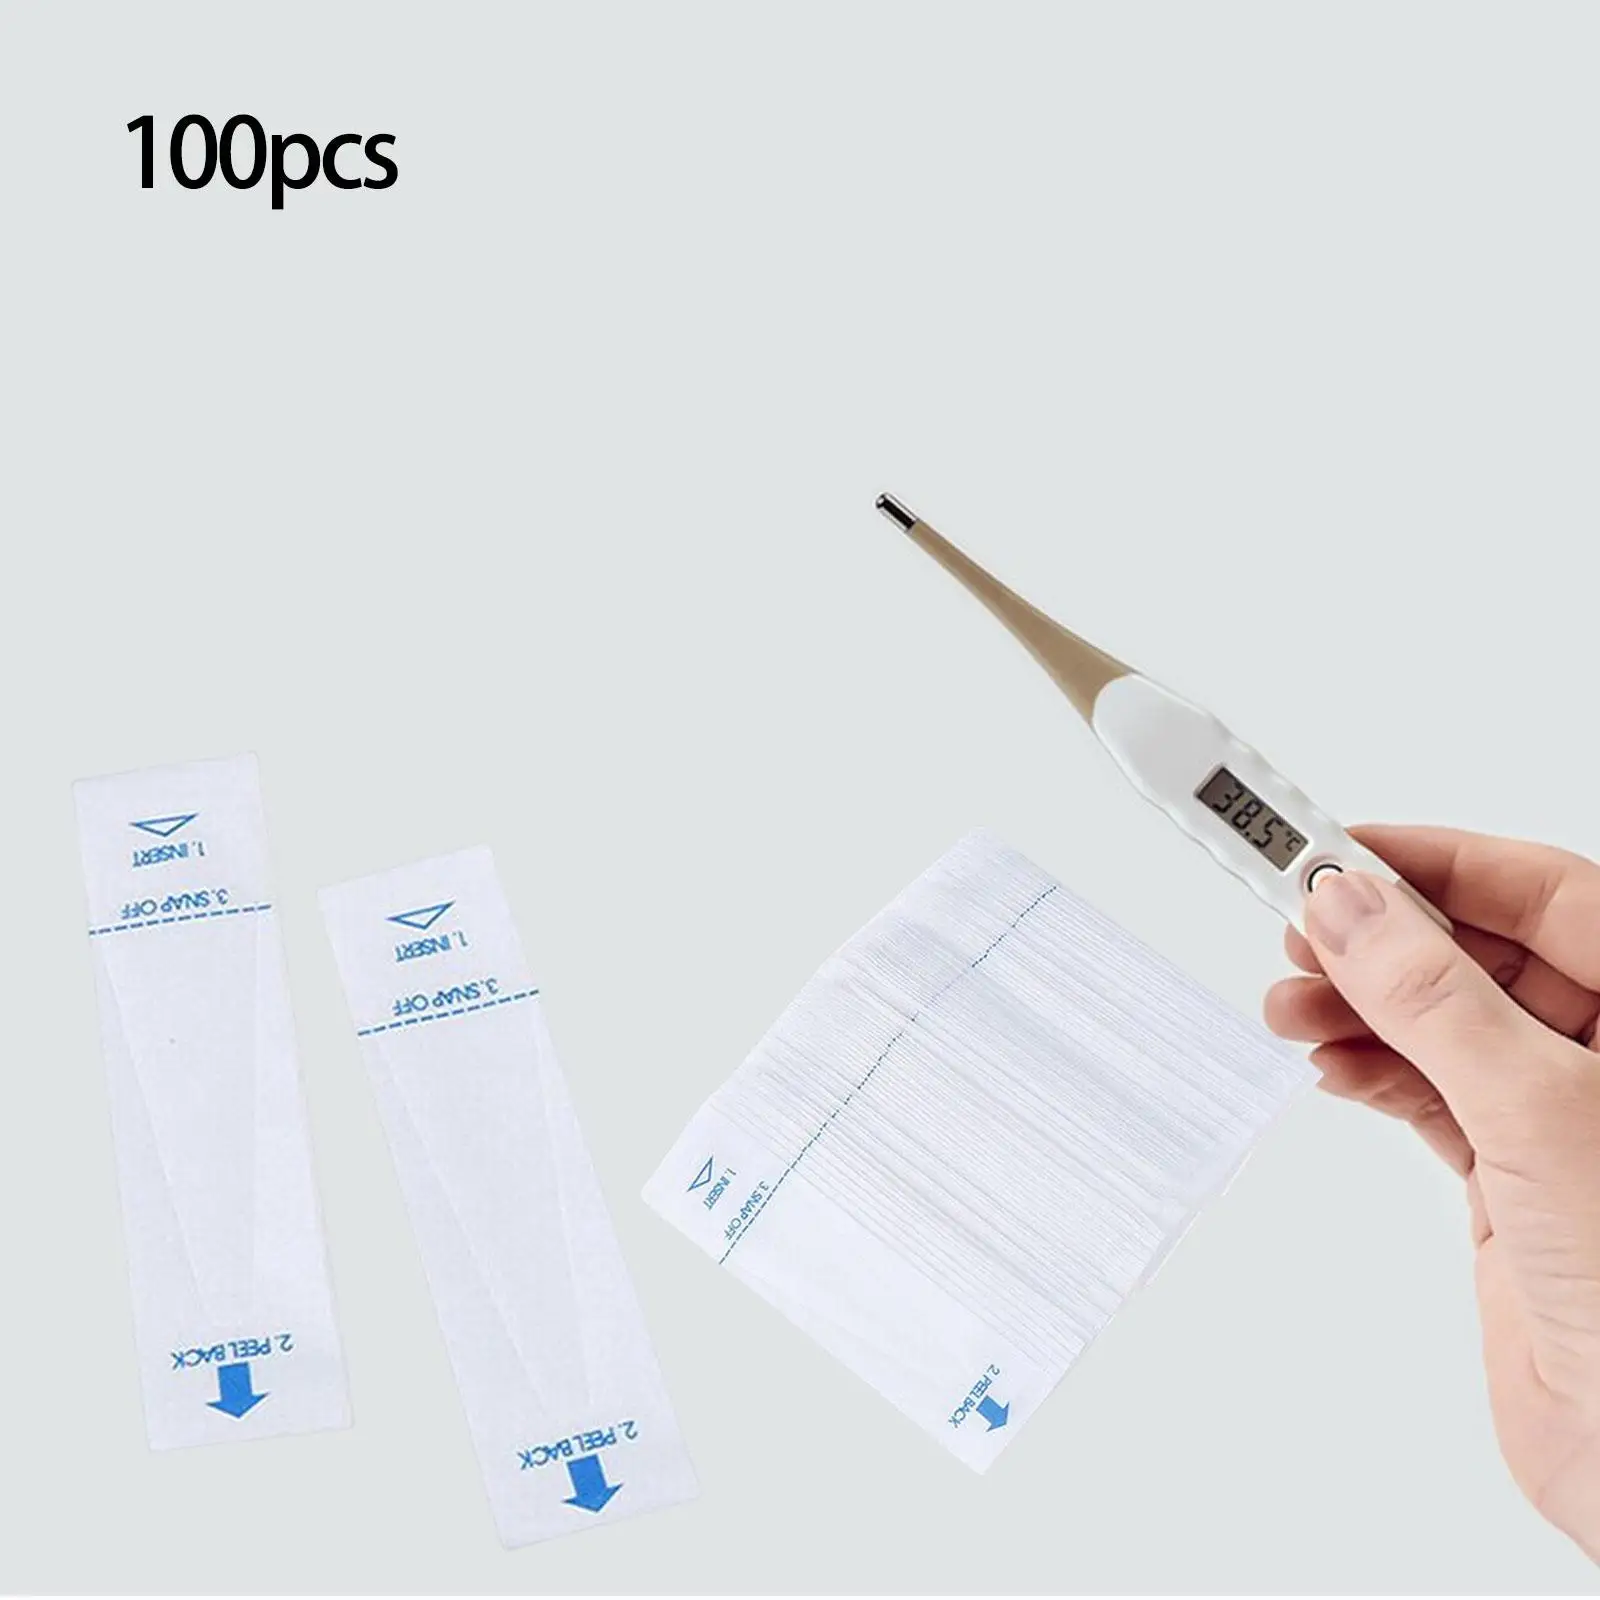 100 Pieces Disposable Probe Covers for Digital Thermometer Protective Universal Electronic Thermometer Sleeve for Family Members